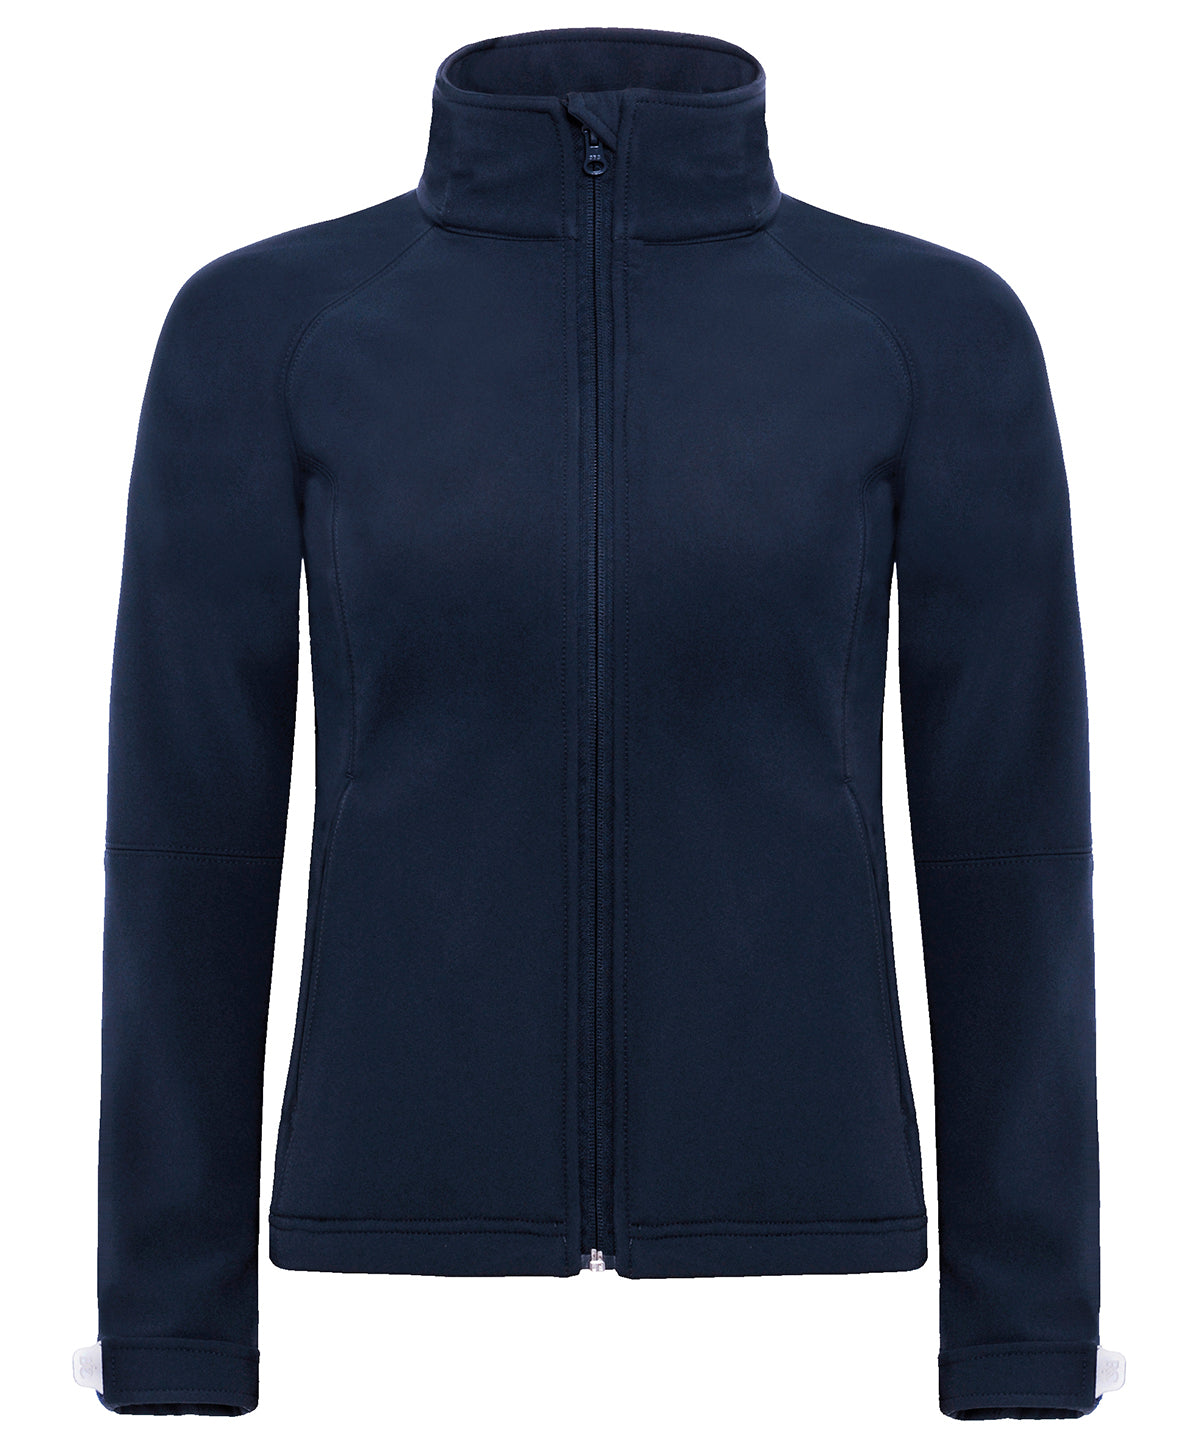 Personalised Jackets - White B&C Collection B&C Hooded softshell /women